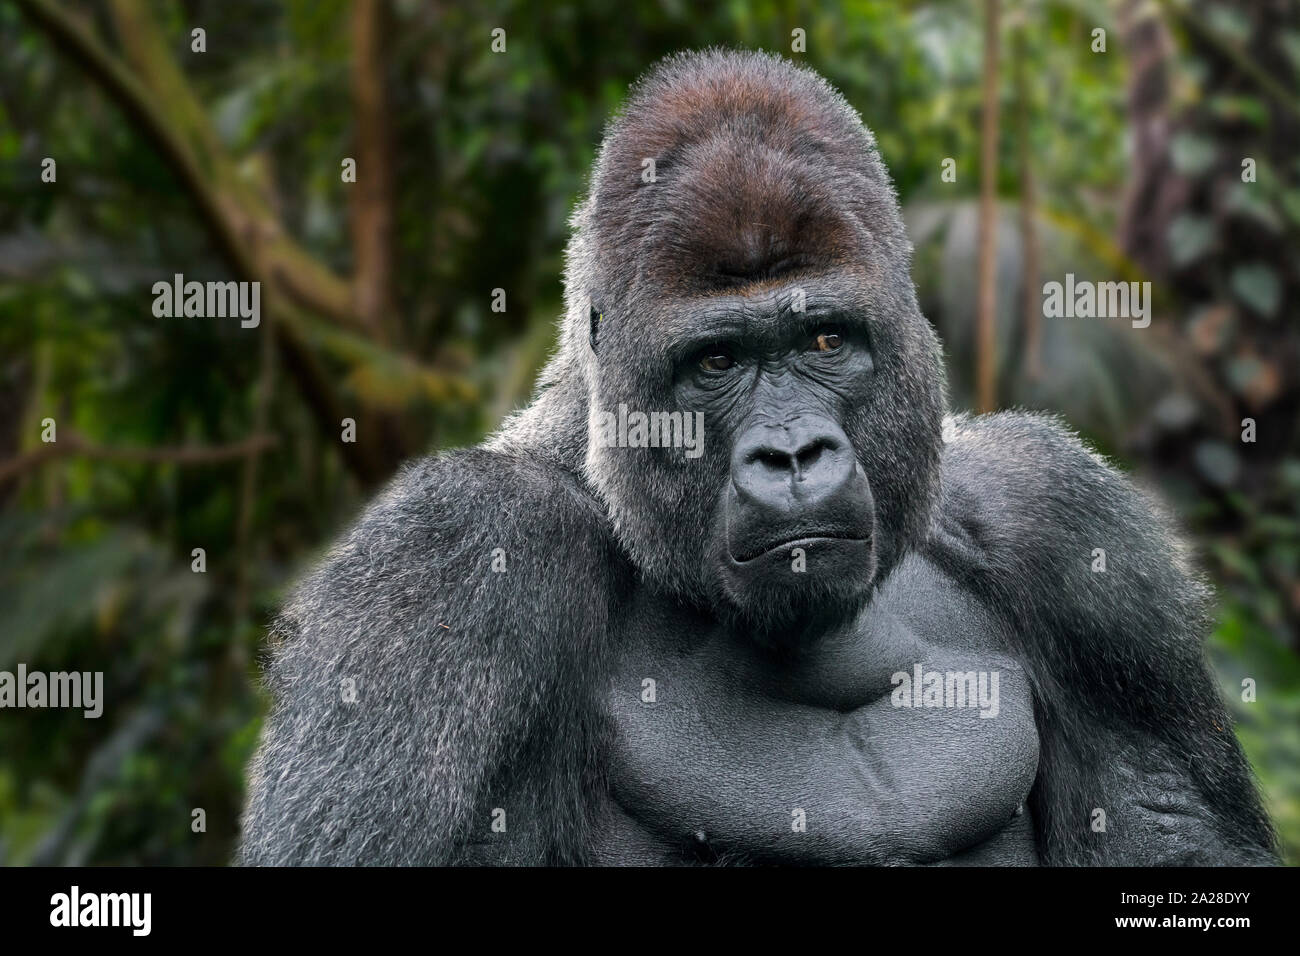 Western lowland gorilla (Gorilla gorilla gorilla) male silverback native to tropical rain forest in Central Africa. Digital composite. Stock Photo